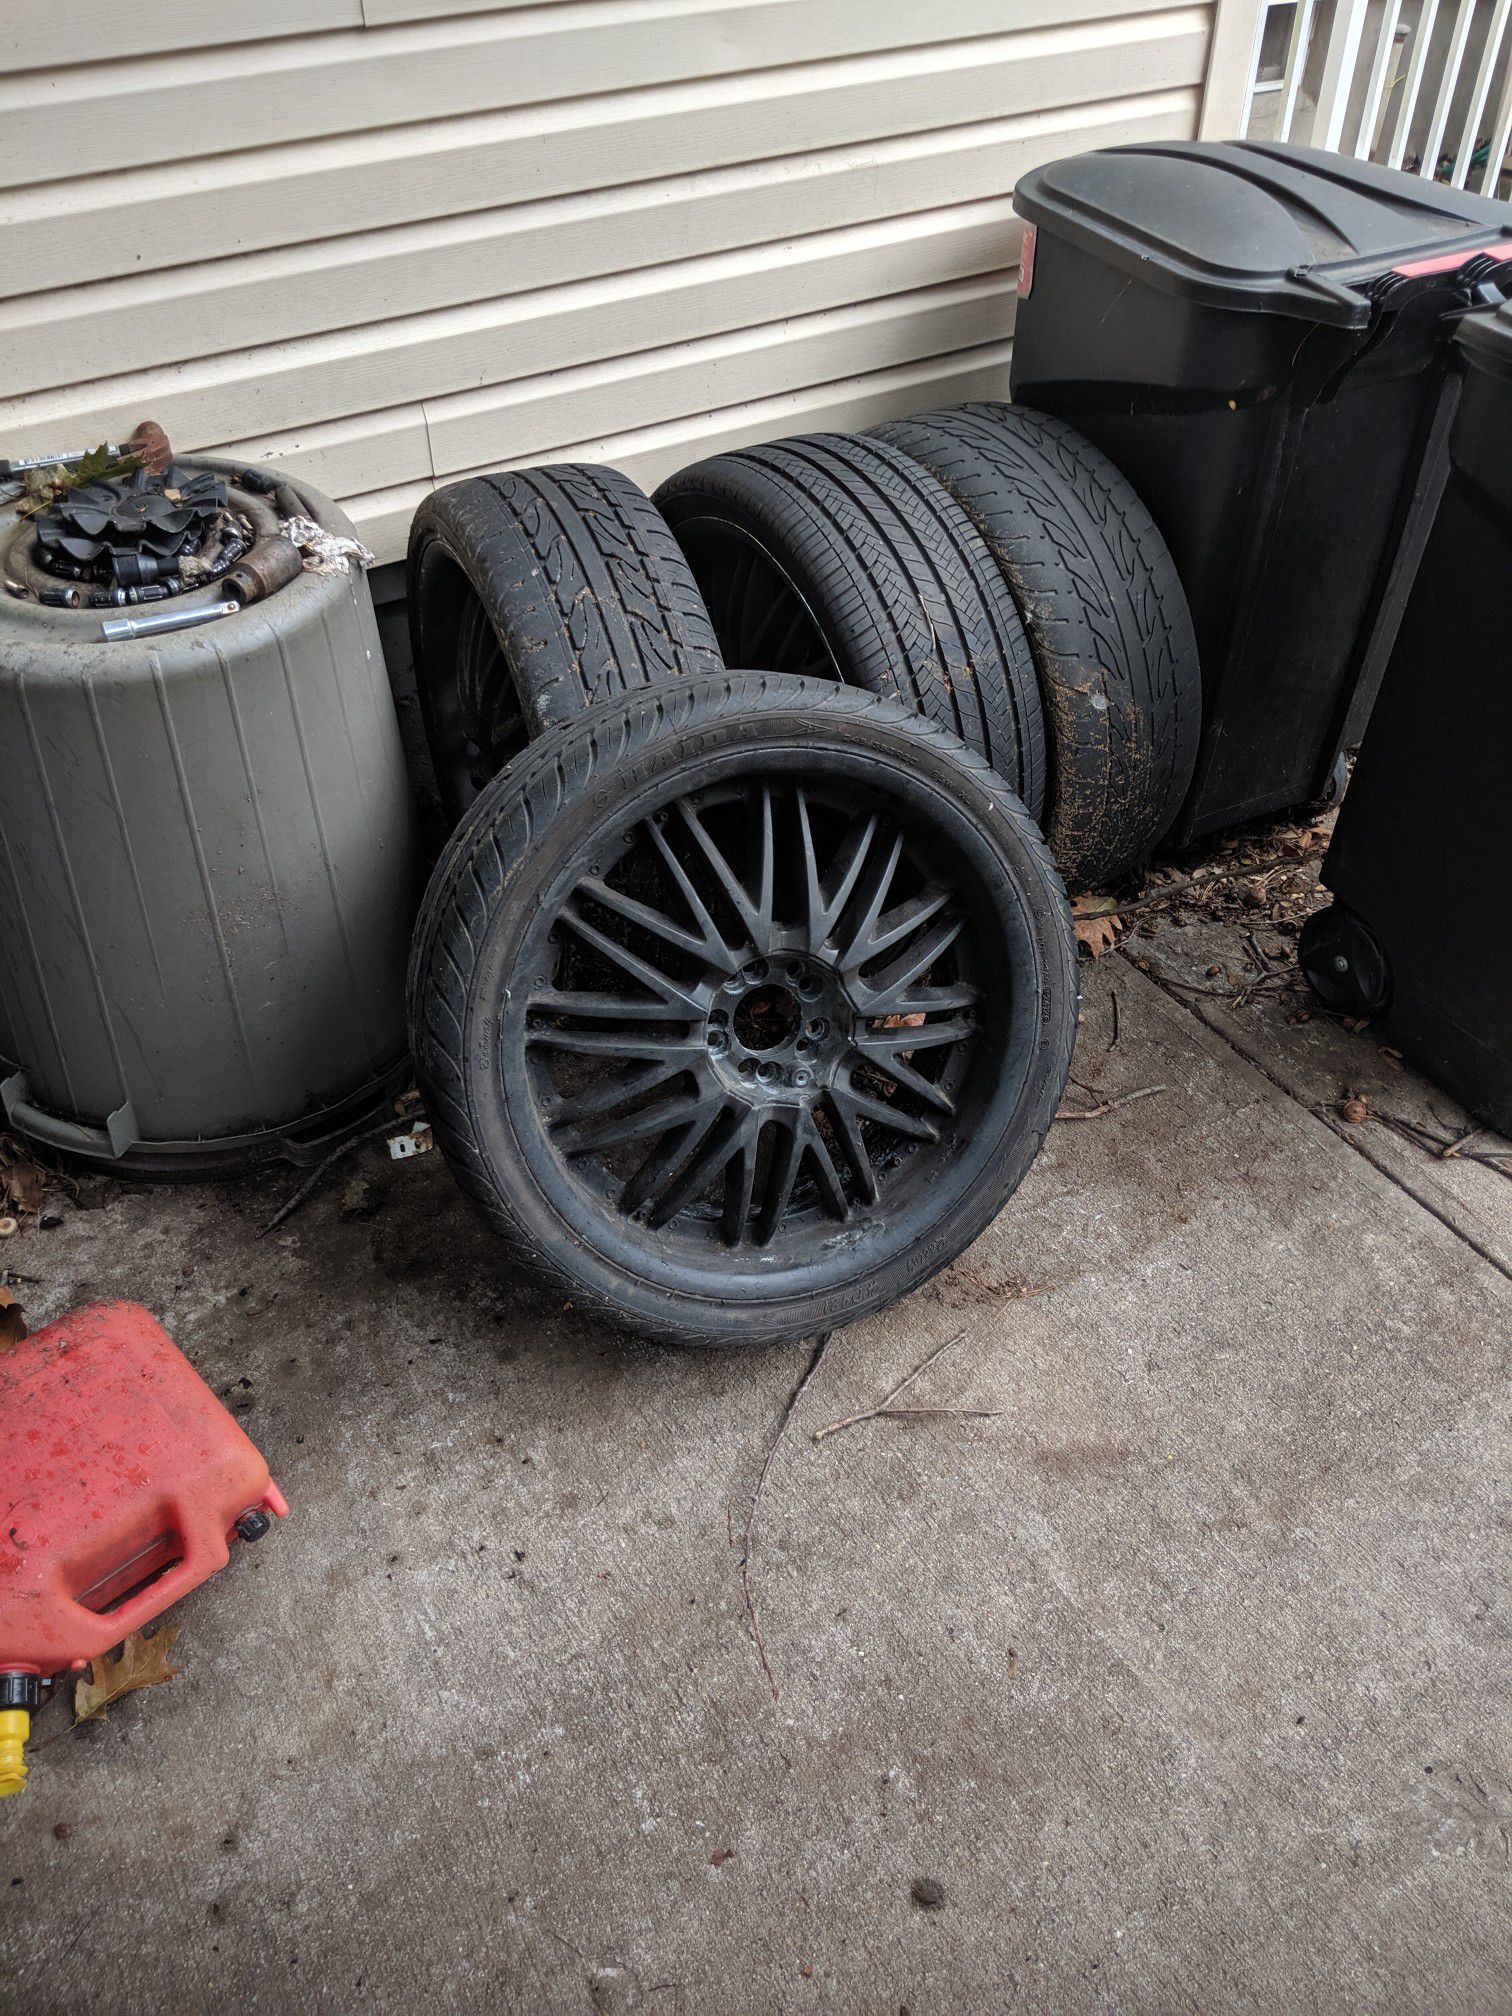 Rims for sell. Two 19" BMW and four 20" universal five lugs. All hold air and have good tires.